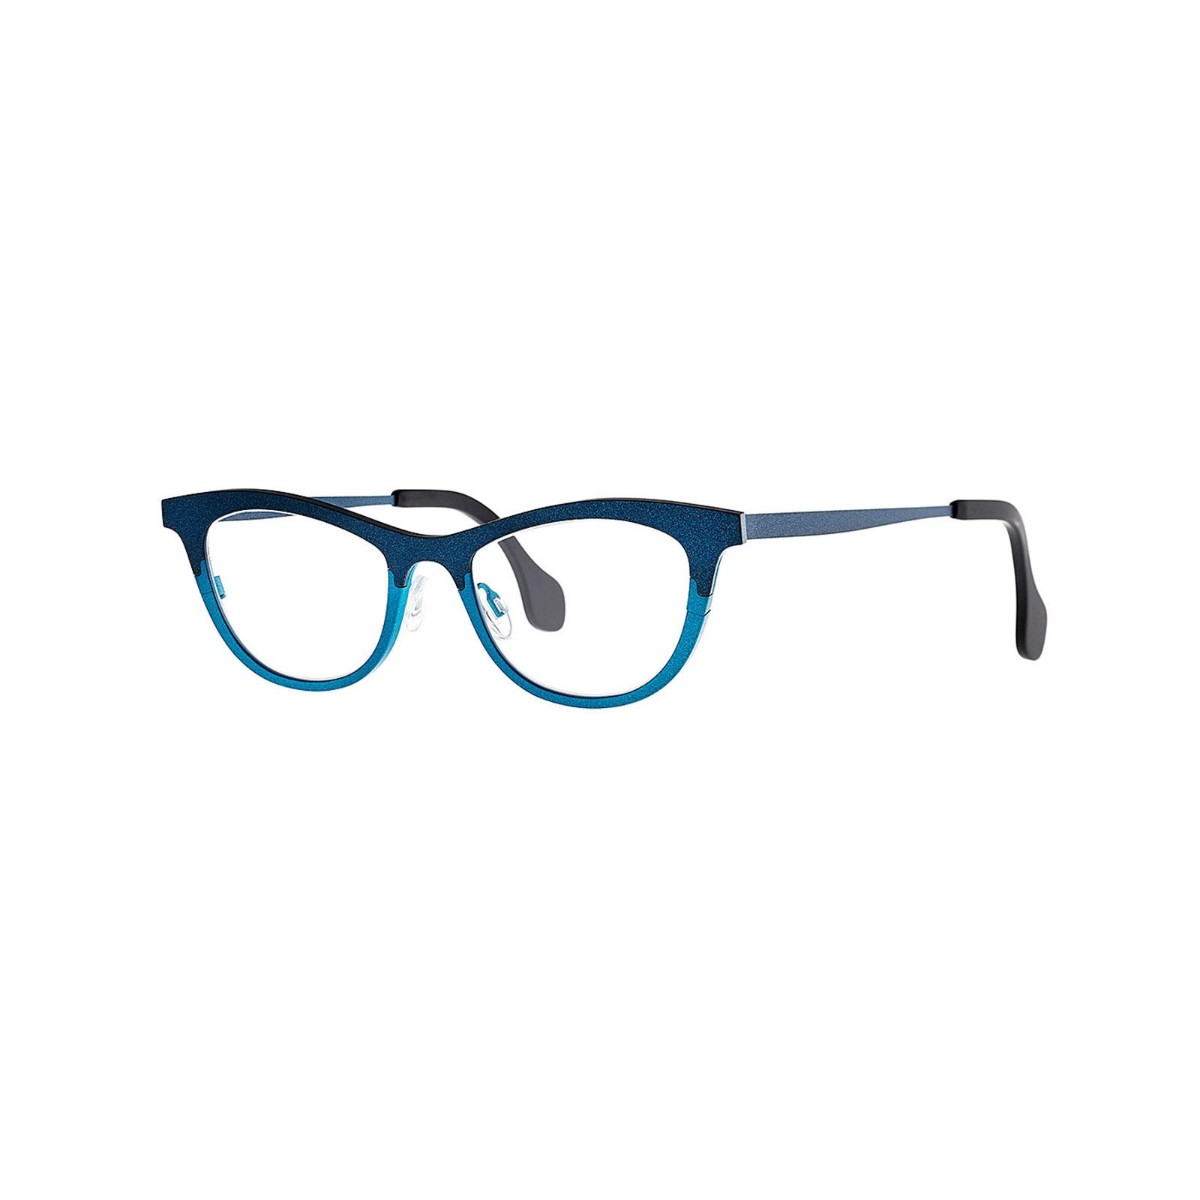 Theo - Mille+59 313 Teal/Blue